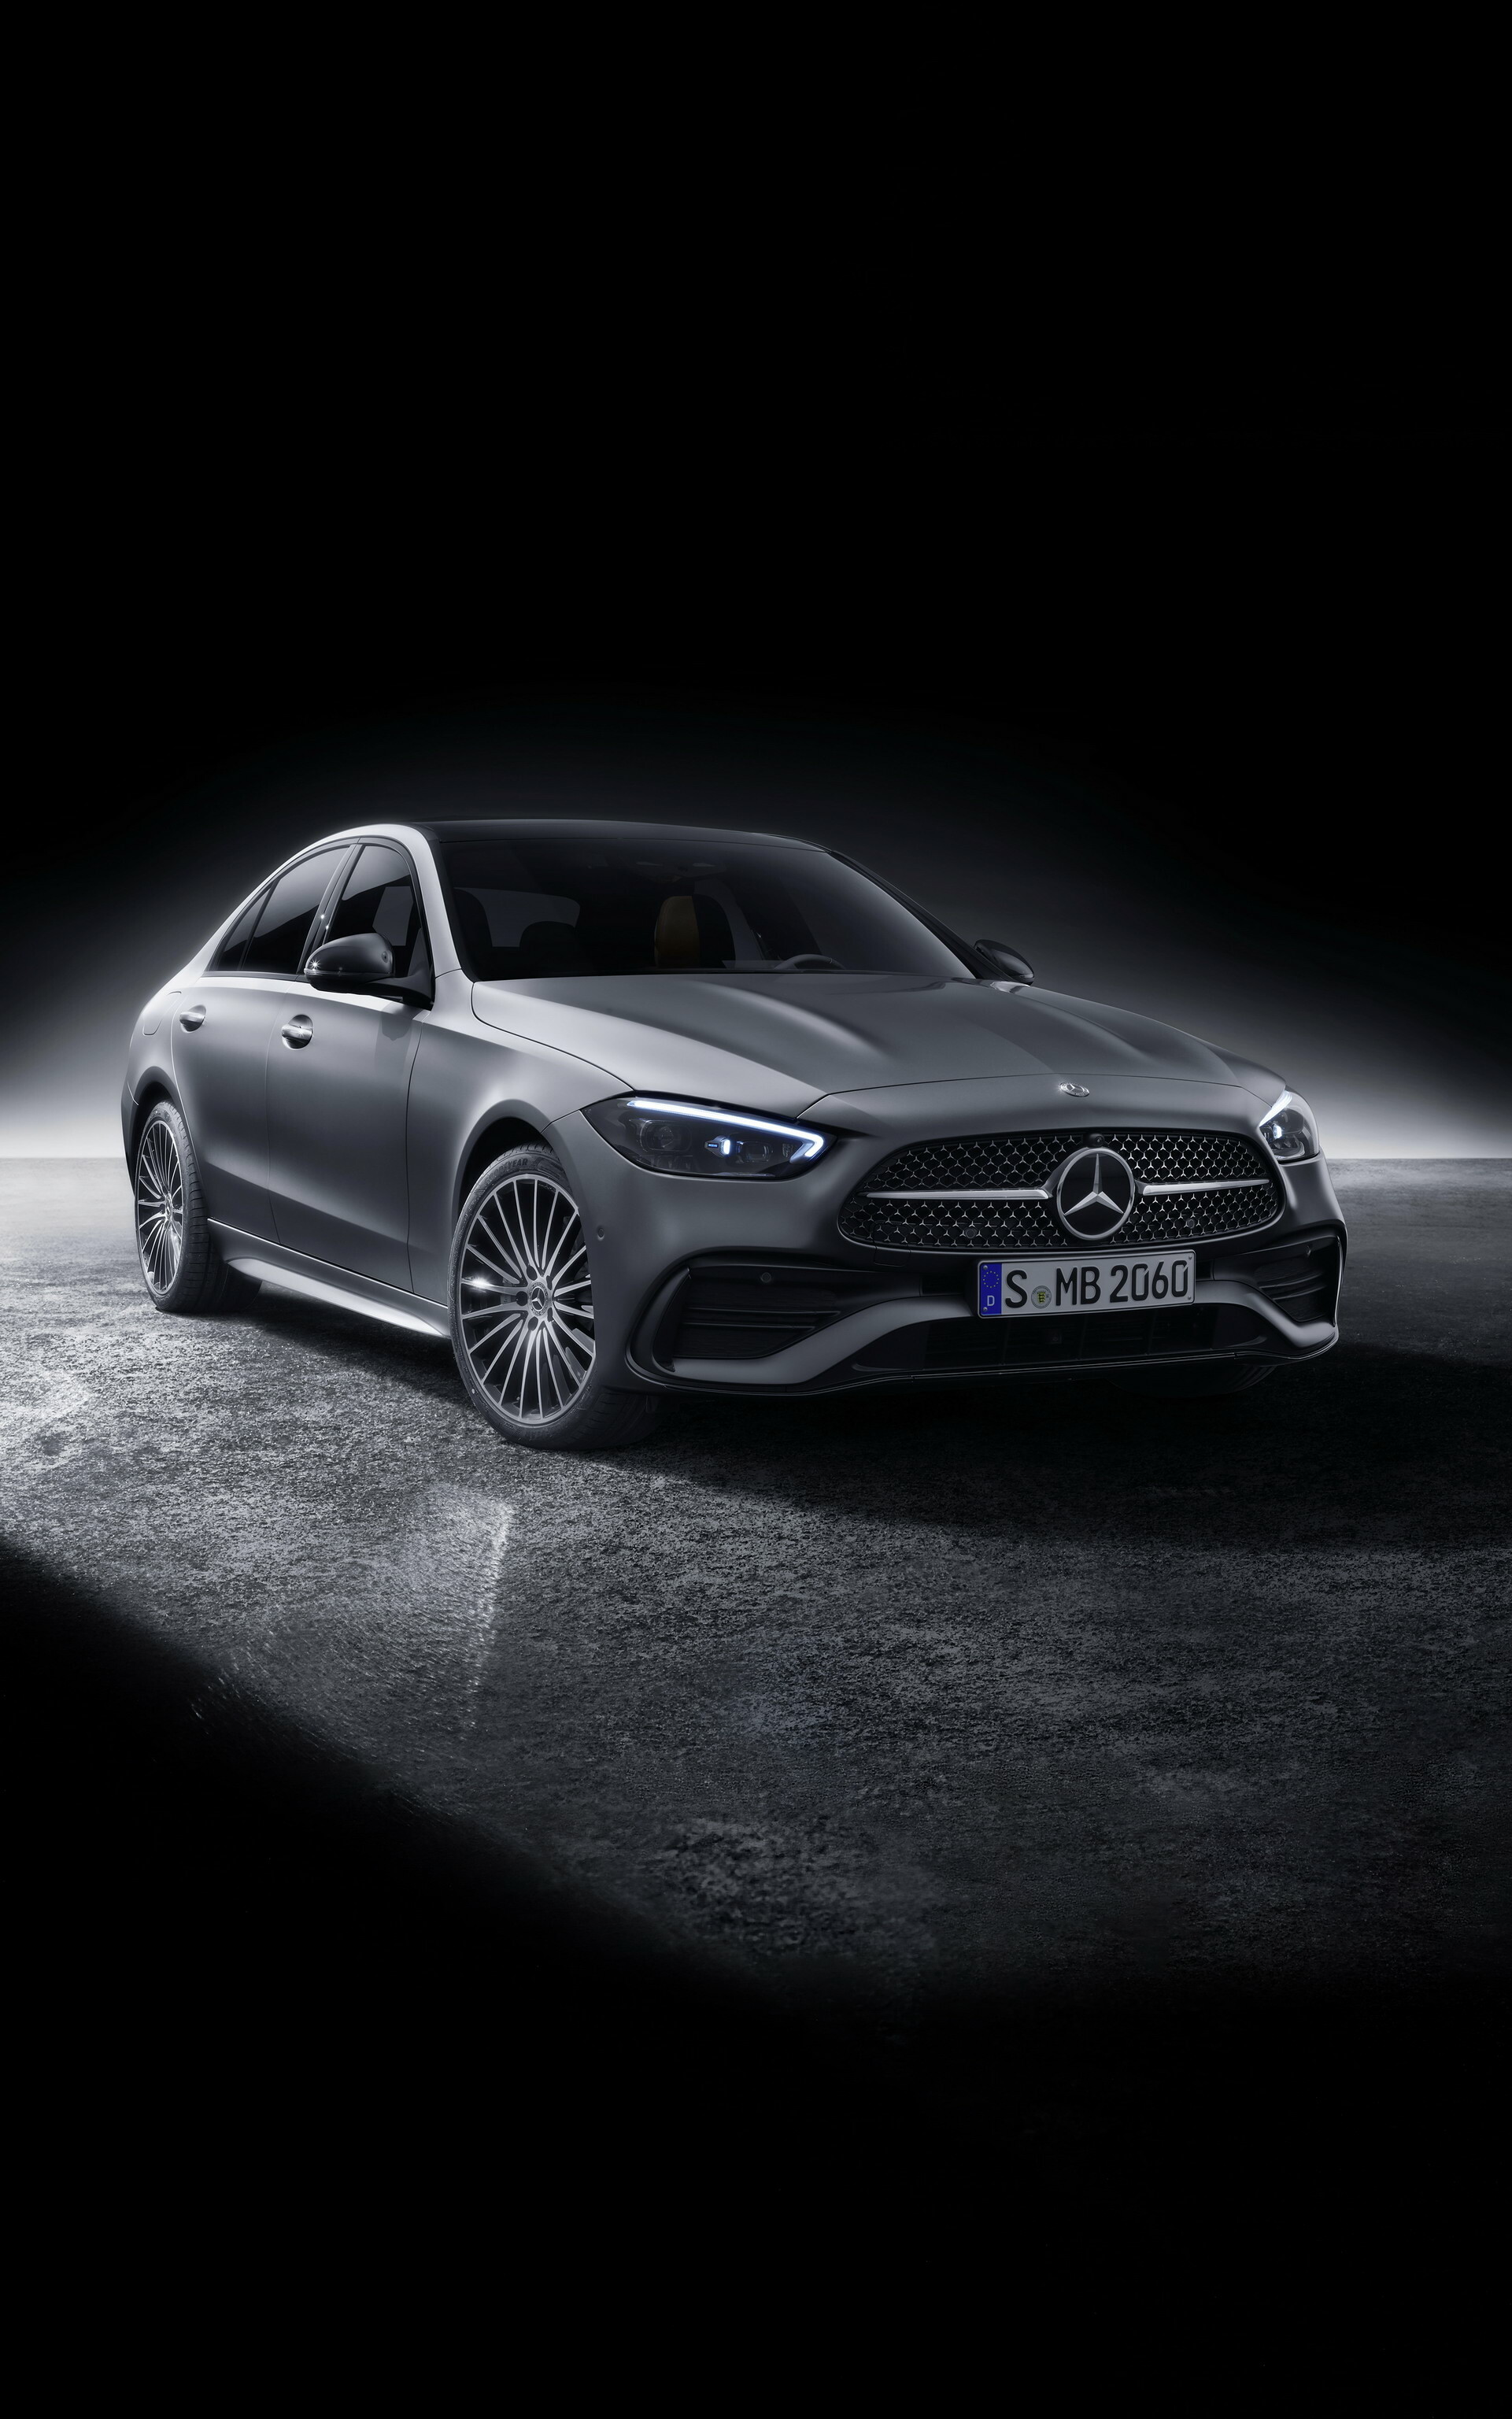 Mercedes-Benz: Both right and left-hand versions of the C-class are built in the plant in East London, South Africa. 1930x3080 HD Wallpaper.